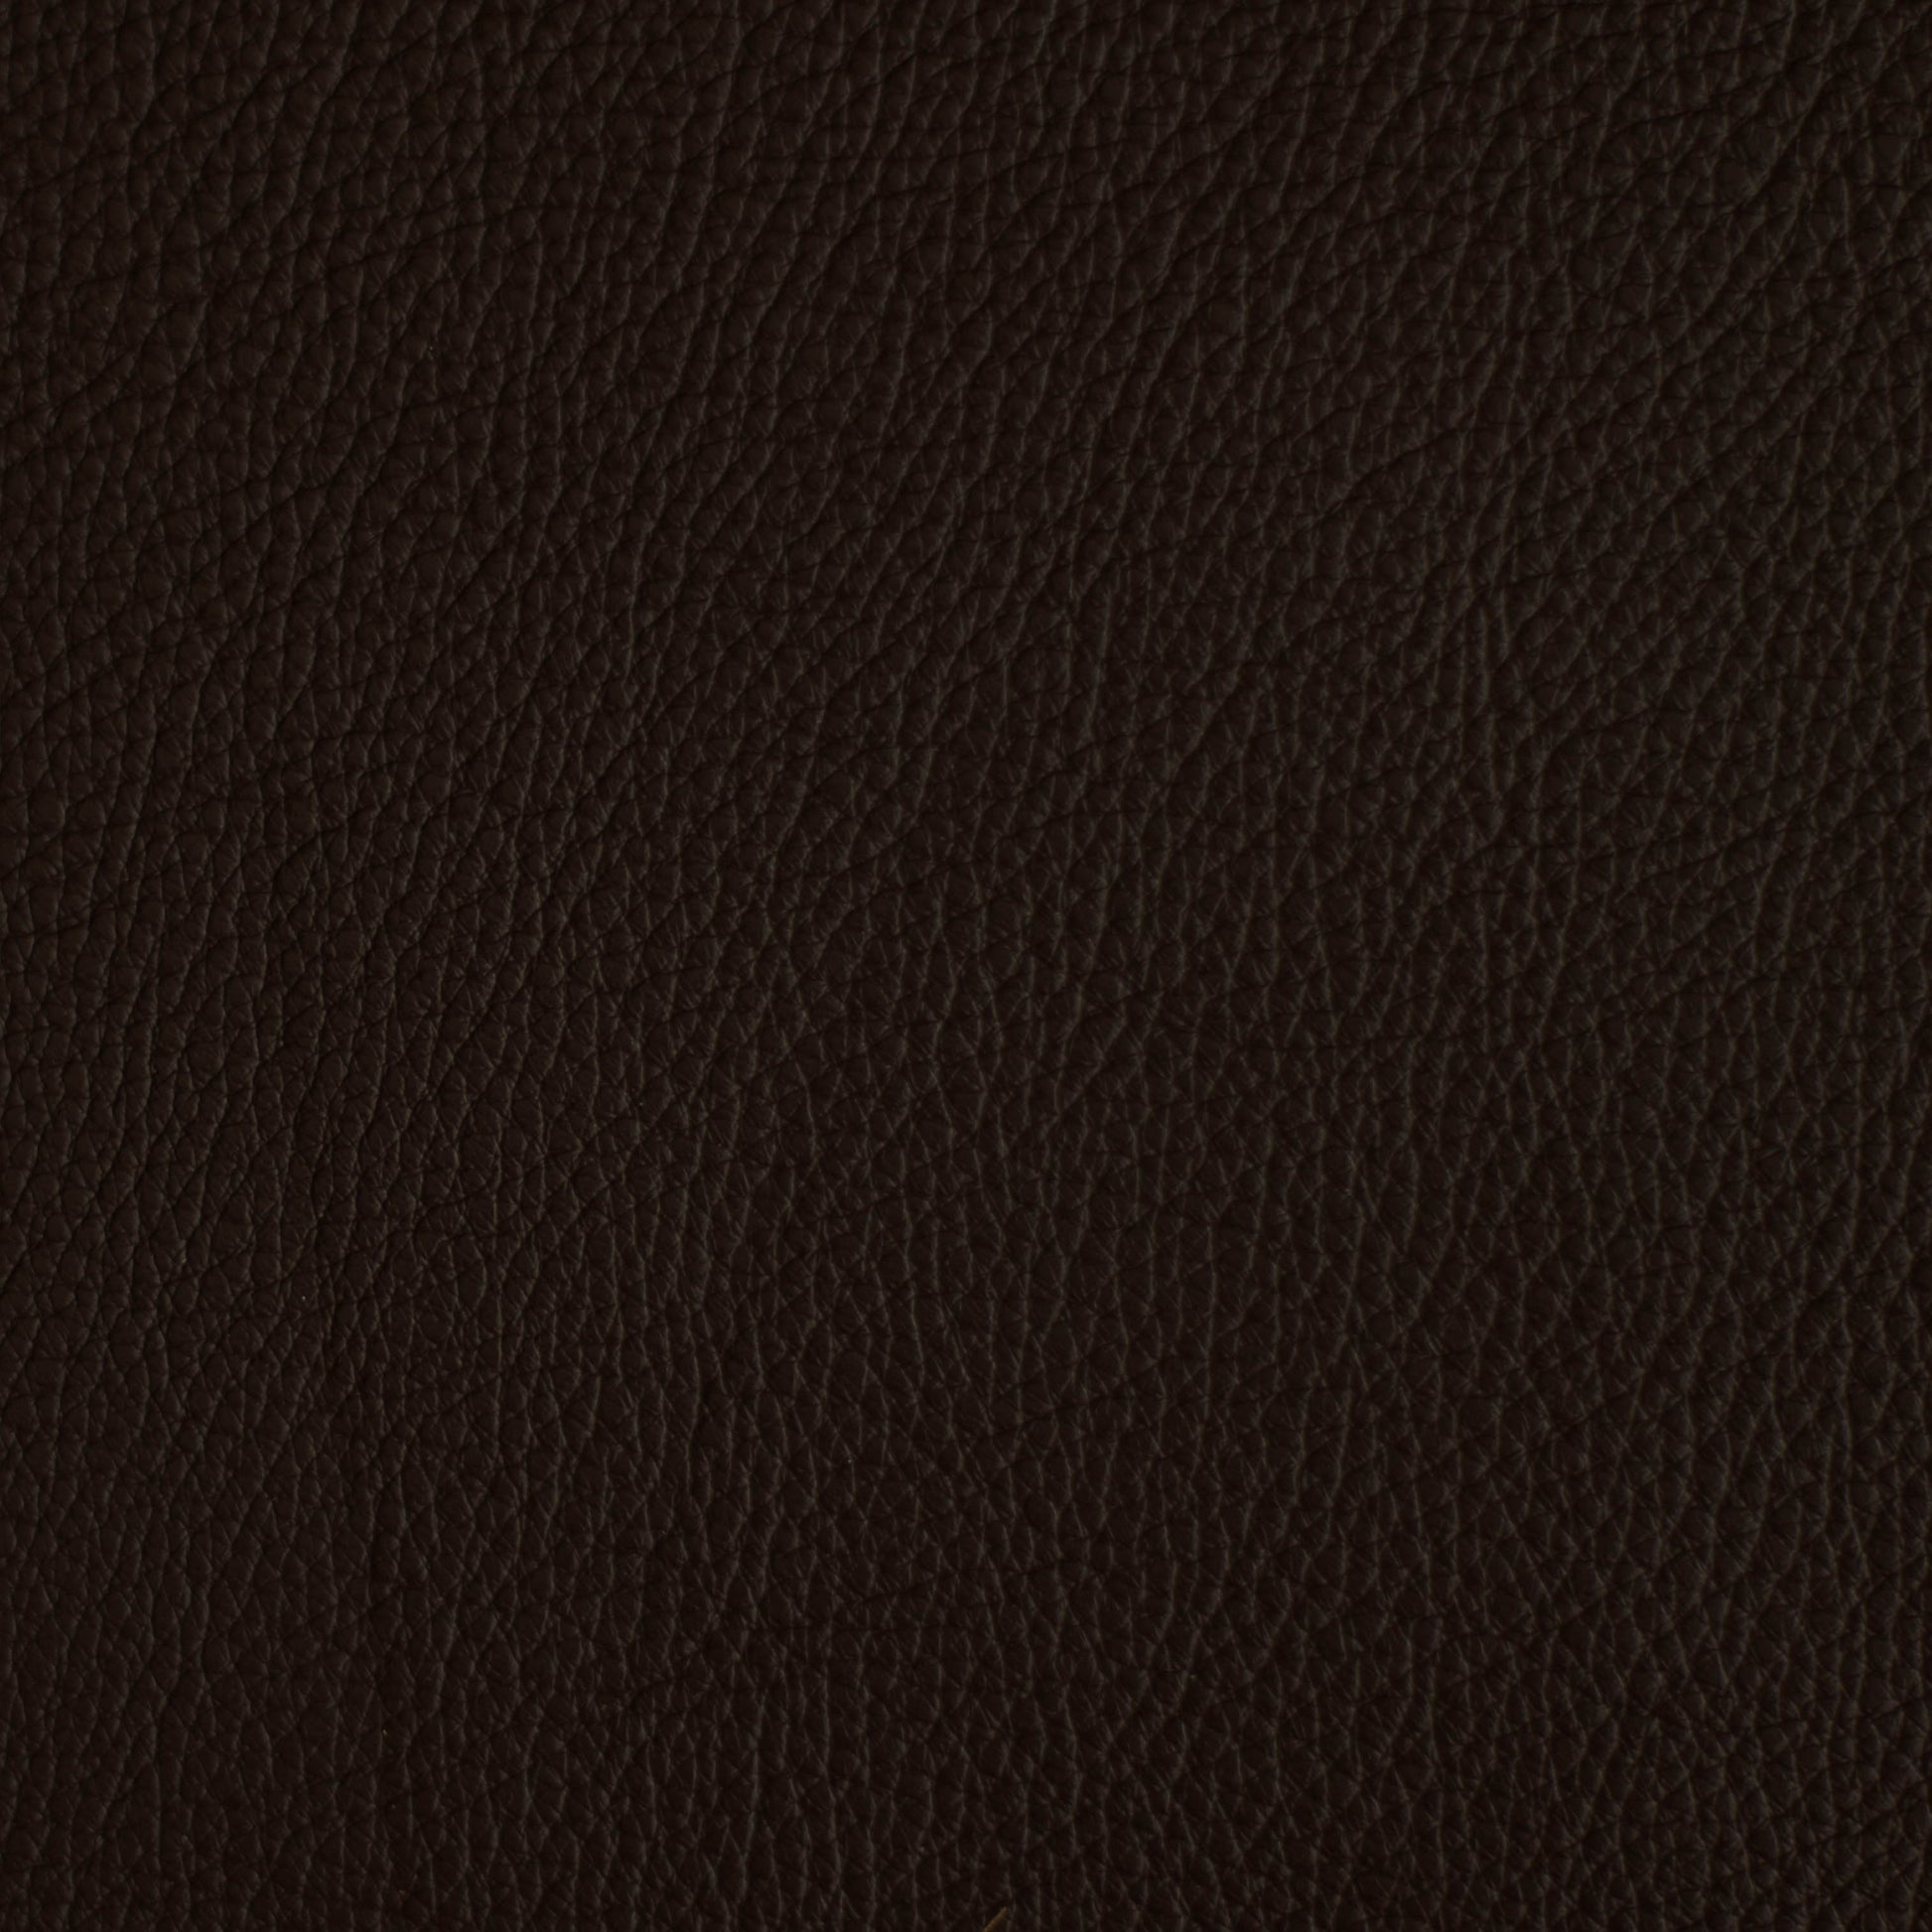 Cityscape, Dark Brown, Spilltop® Water Resistance, Hospitality Leather Hide